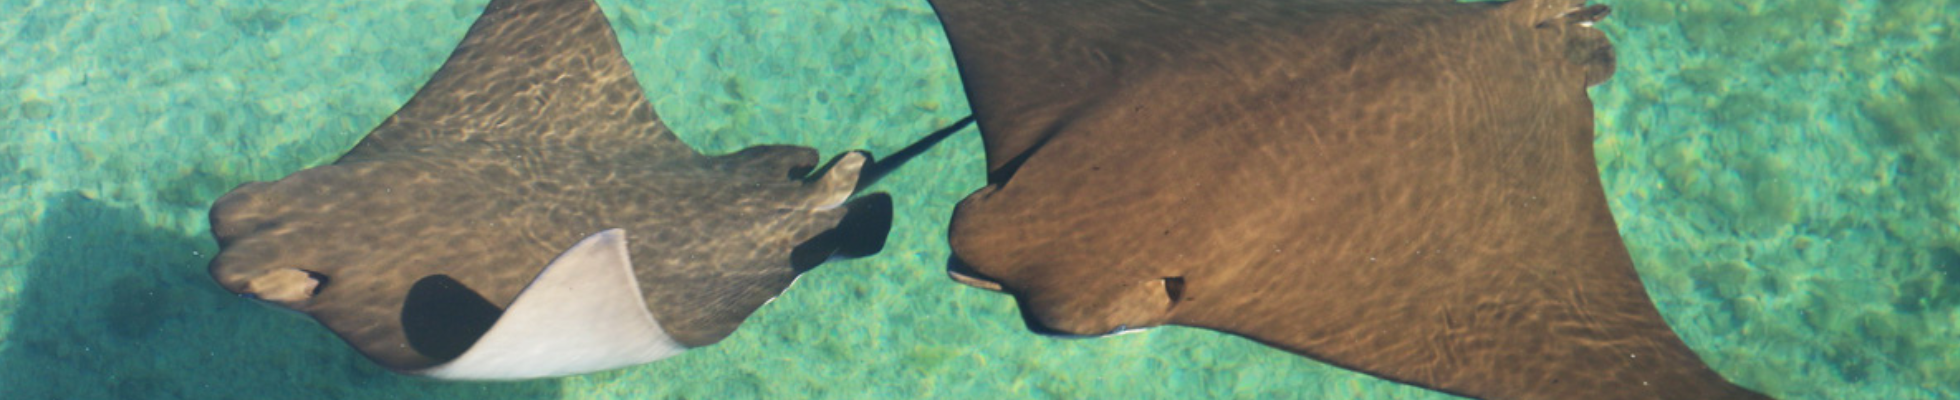 stingrays in teal water